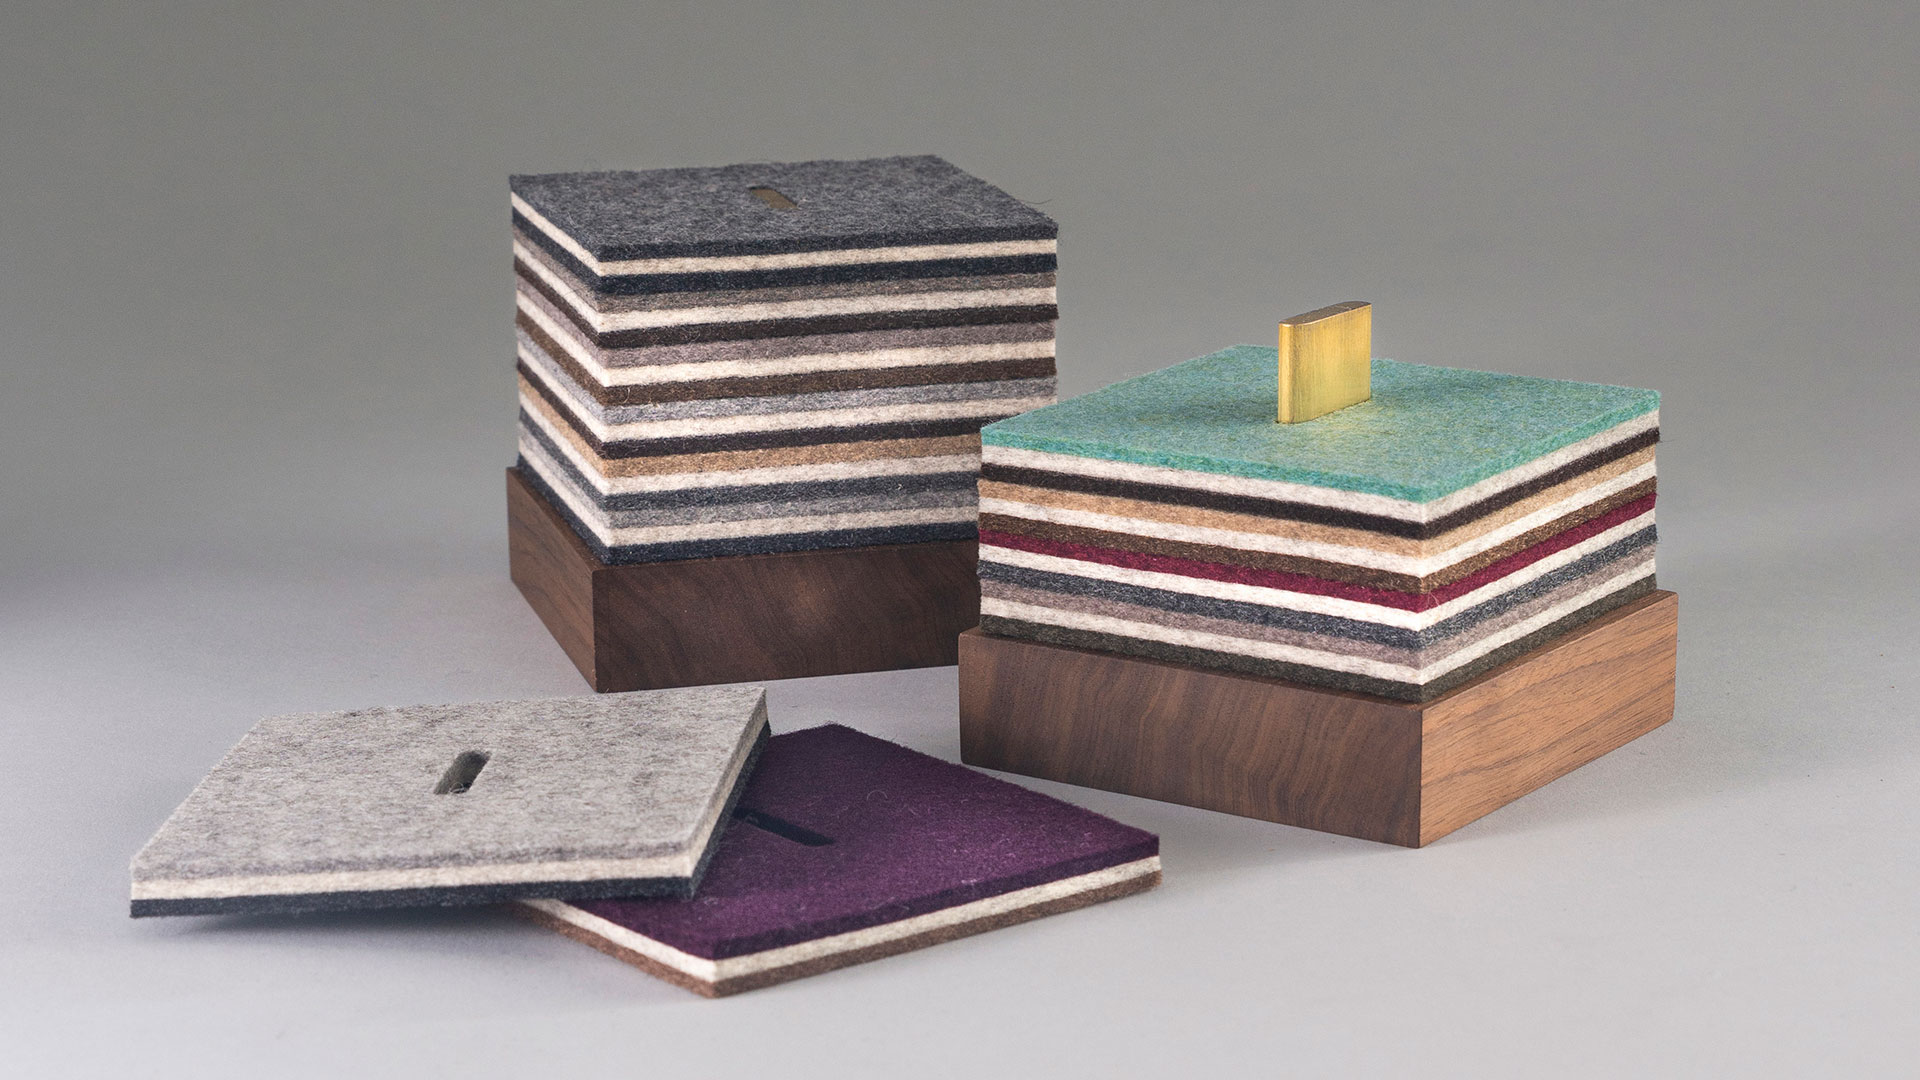 Two coaster sets with dark wood bases and layered multicolor felt square coasters